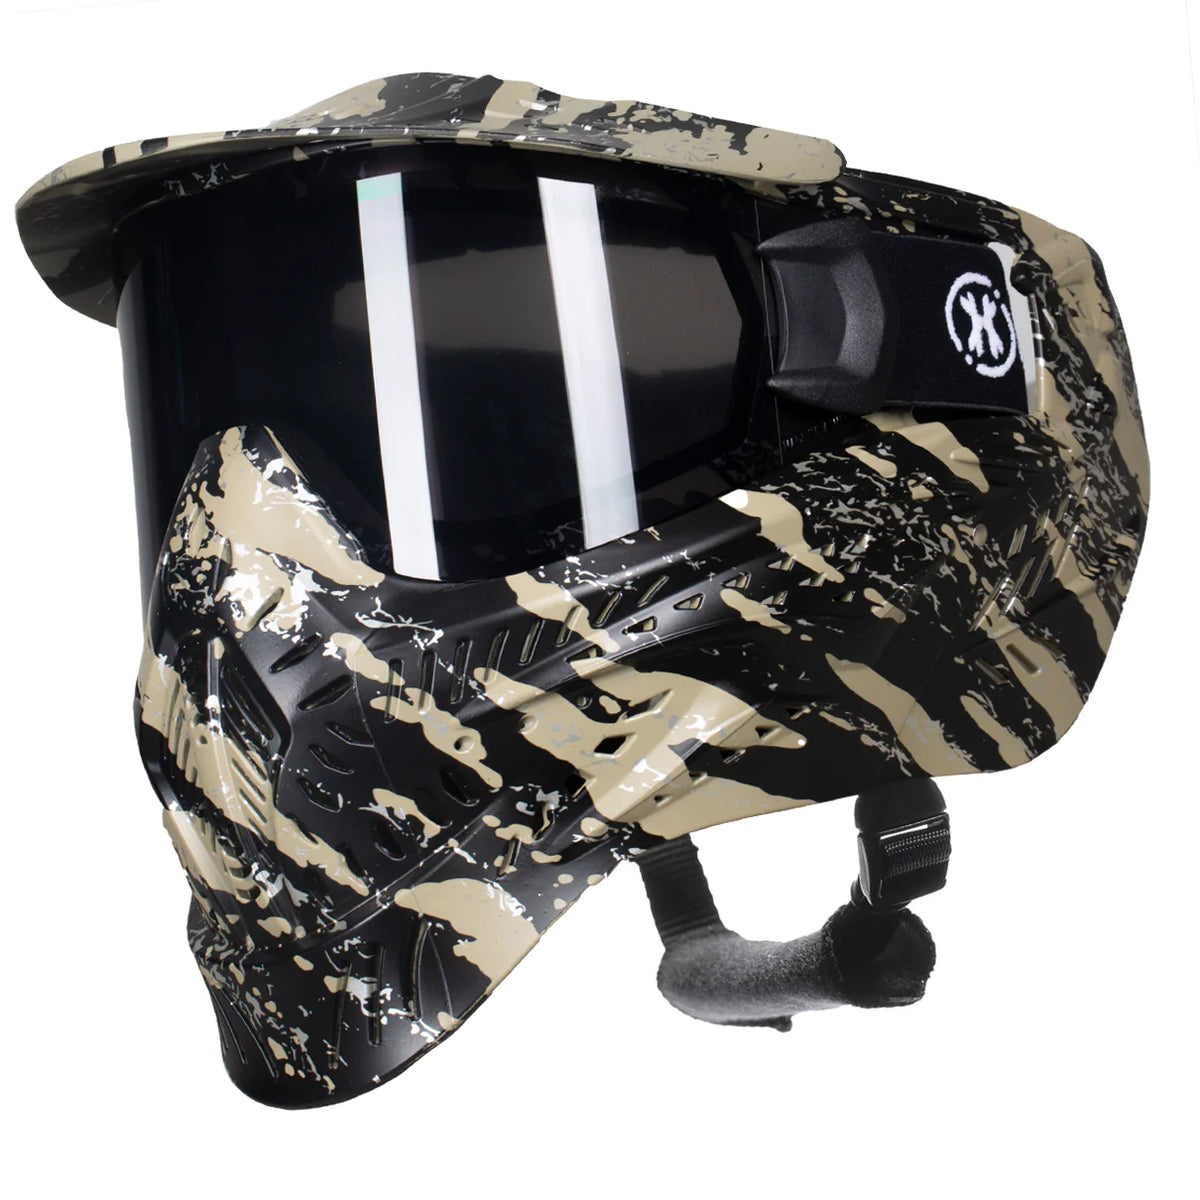 HSTL Goggle | Fracture Black/Tan | Paintball & Airsoft Goggle